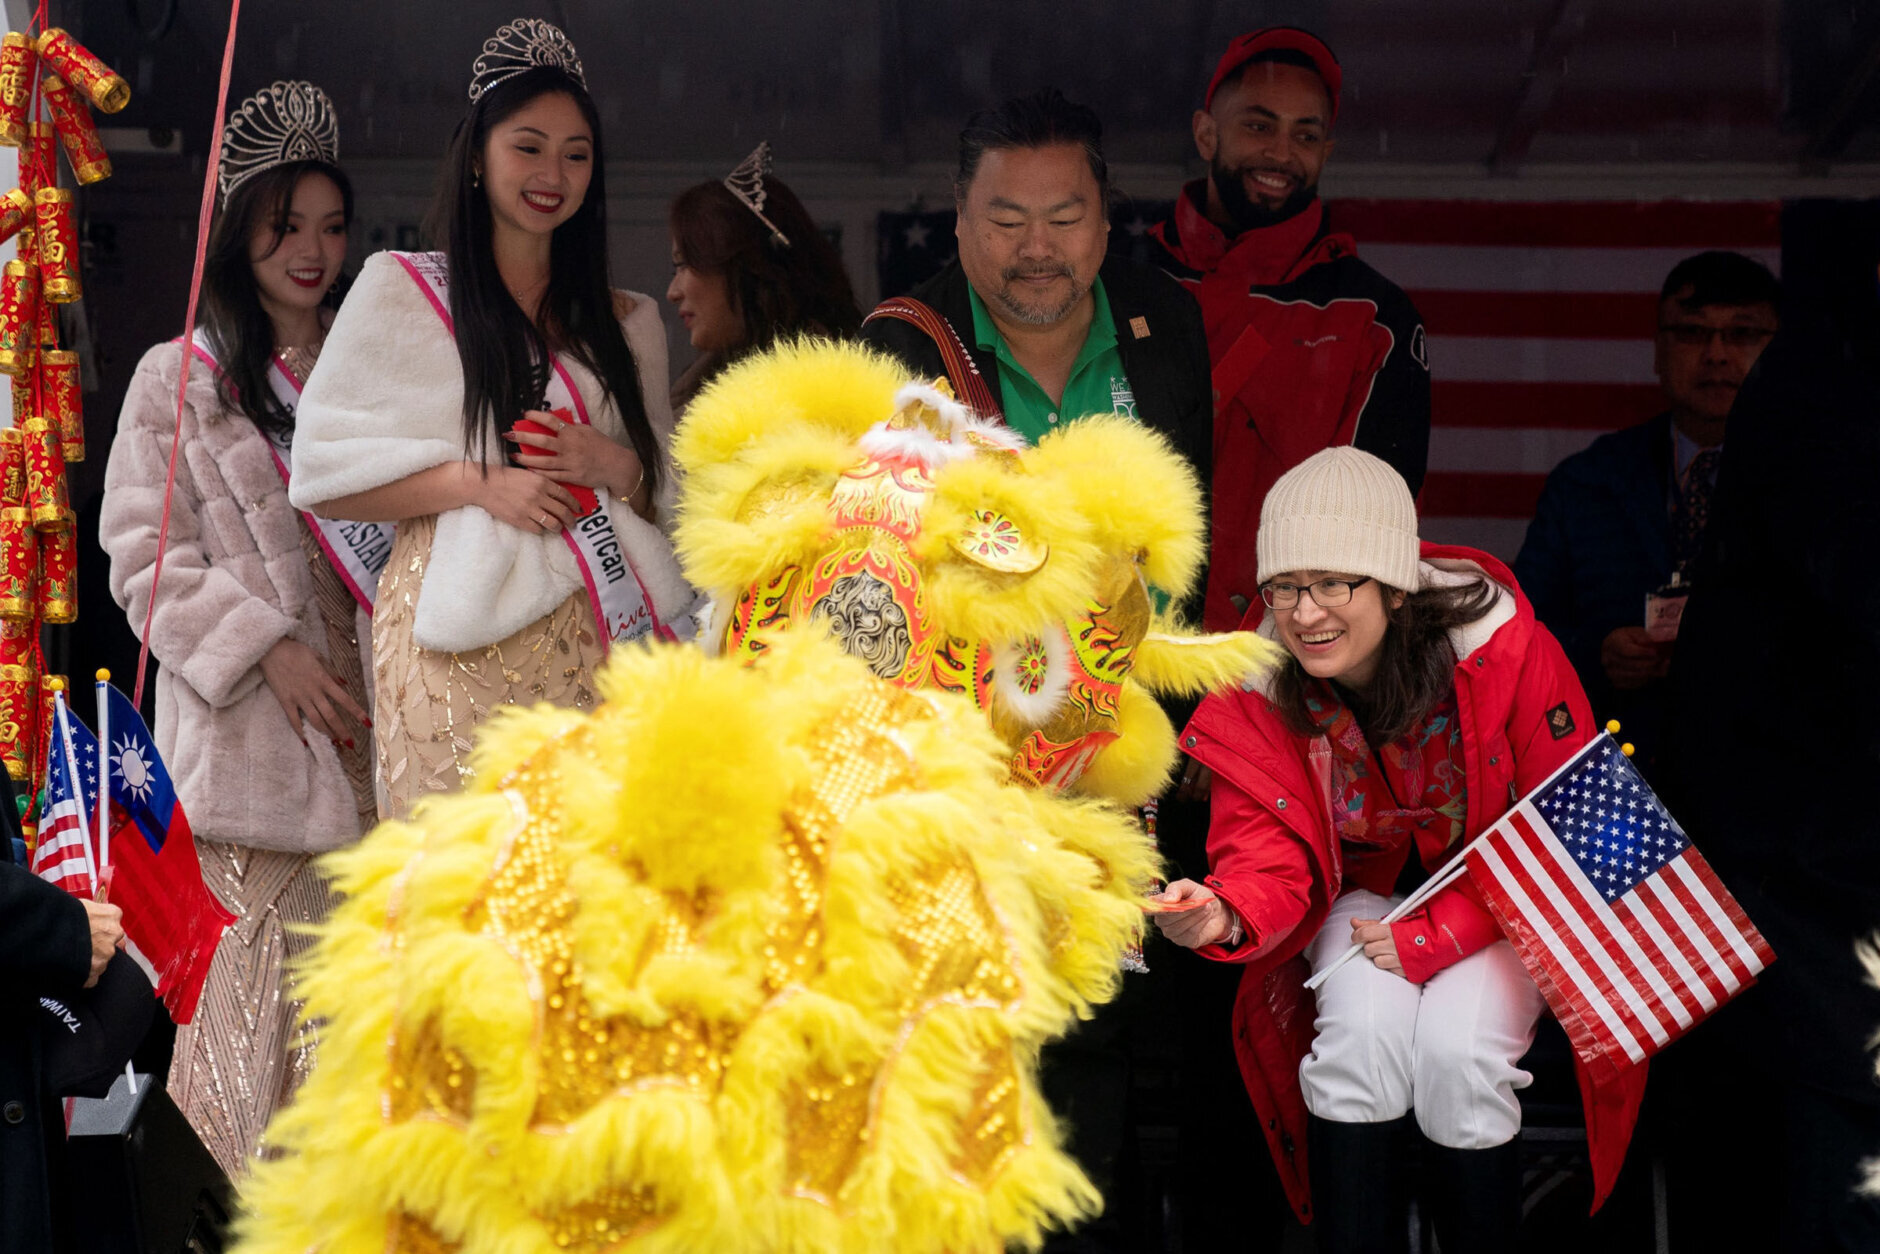 People give gifts to a performer following the Lunar New Year Parade in the Chinatown neighborhood of Washington, DC, on January 22, 2023. - 2023 is the year of the rabbit in the Chinese horoscope. (Photo by Stefani Reynolds / AFP) (Photo by STEFANI REYNOLDS/AFP via Getty Images)